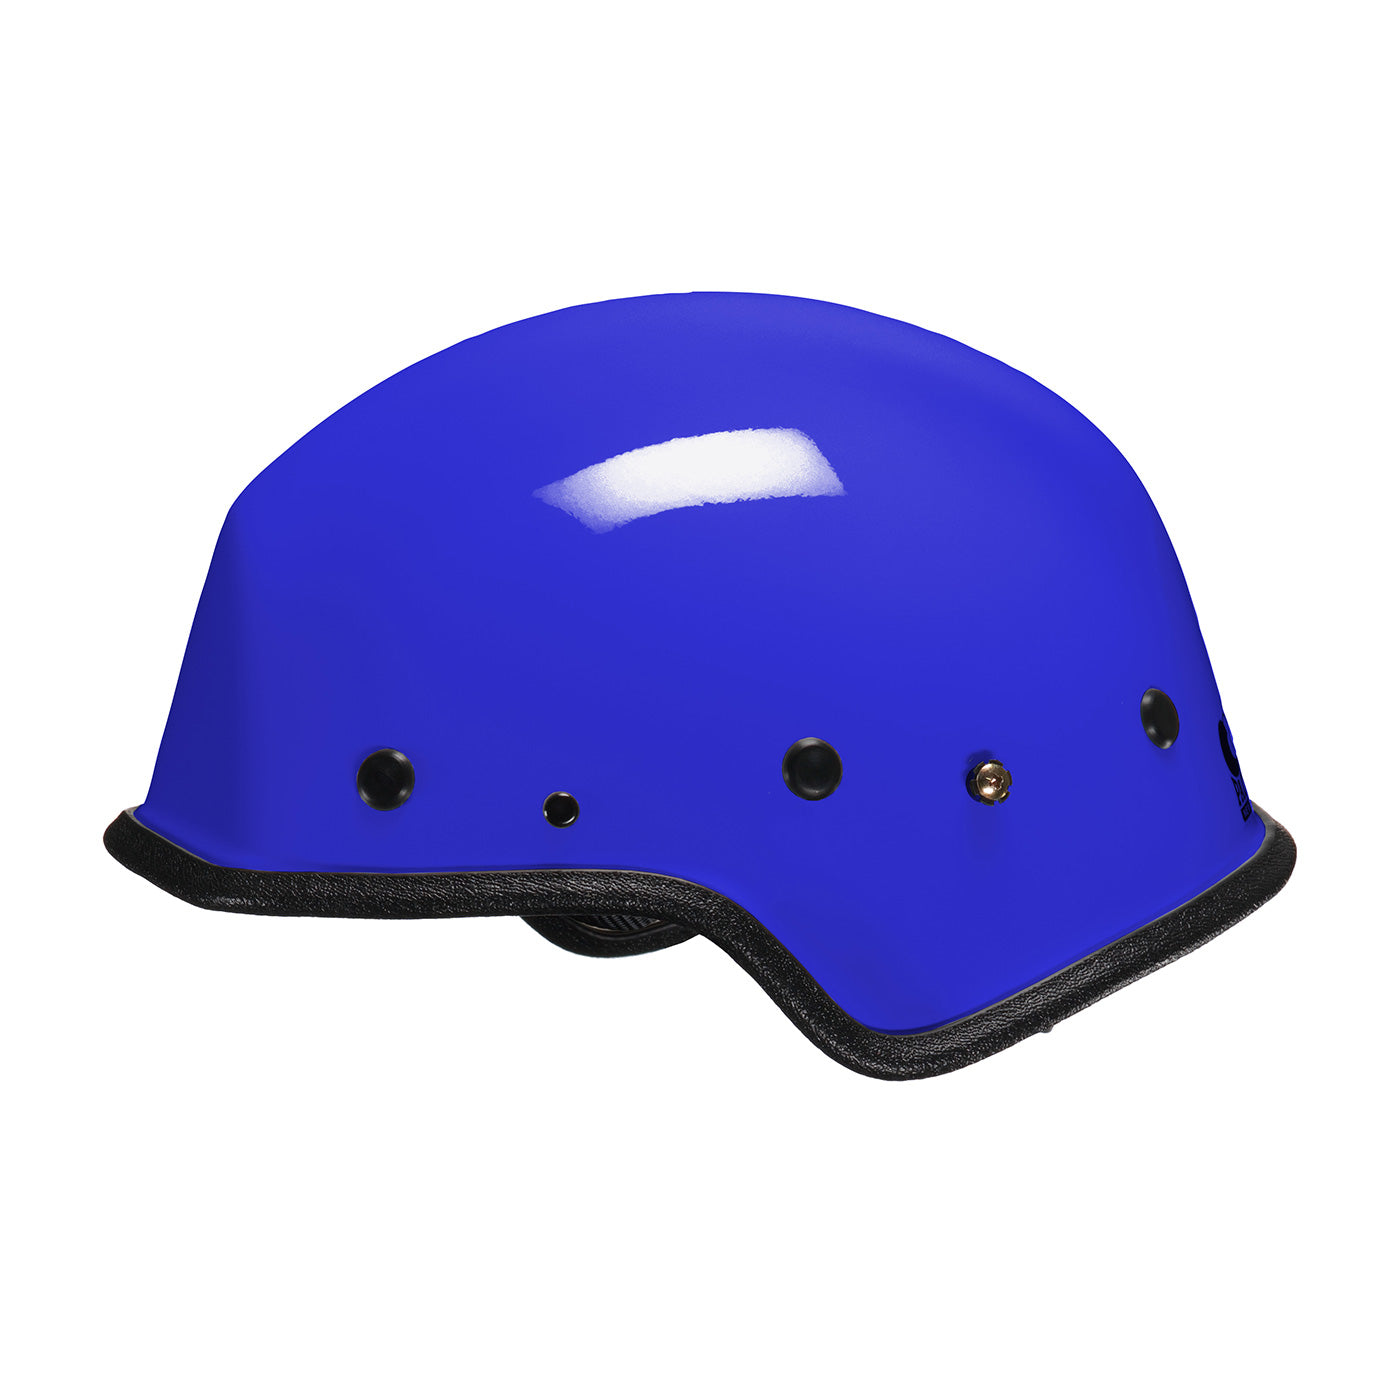 R7H Rescue Helmet with ESS Goggle Mounts